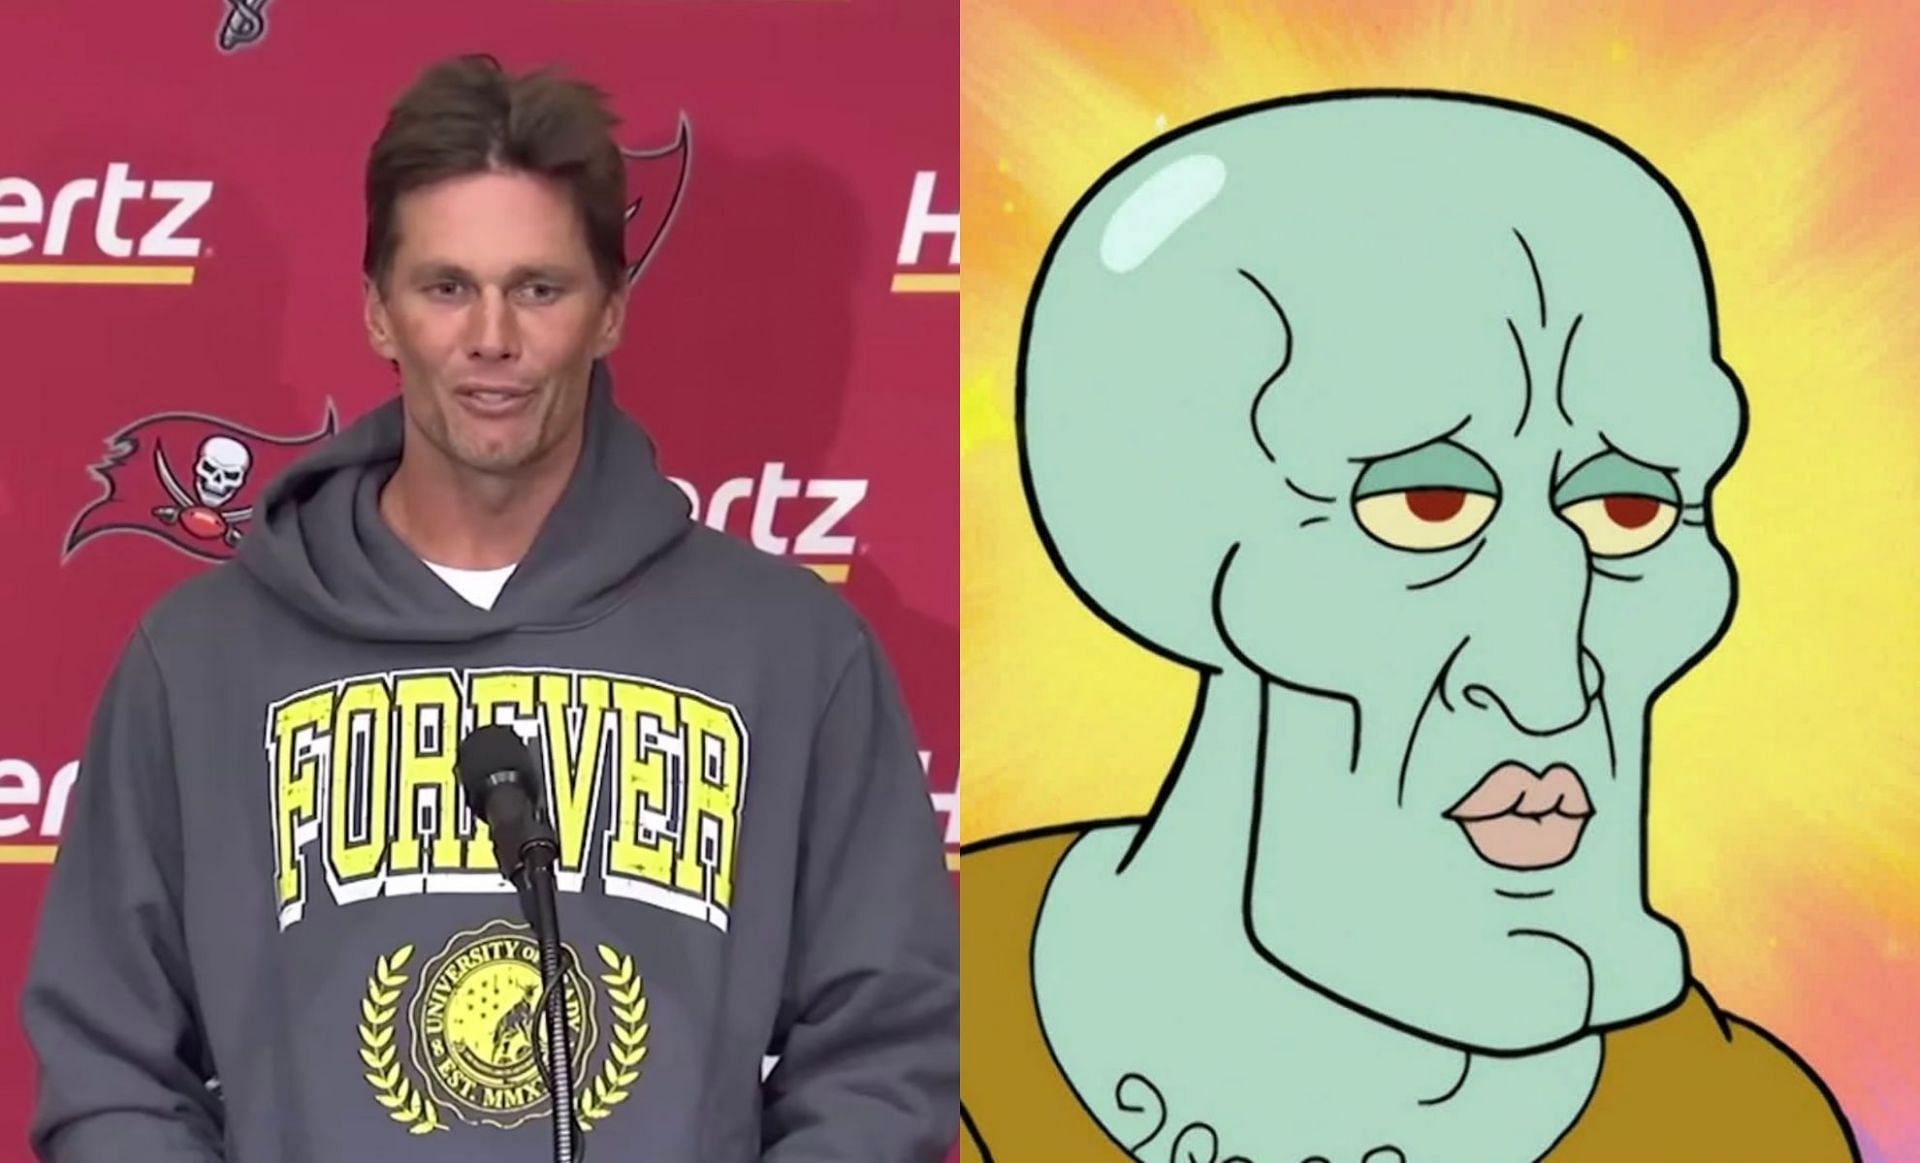 The quarterback was compared to Handsome Squidward (Images via ar_wise on Twitter)